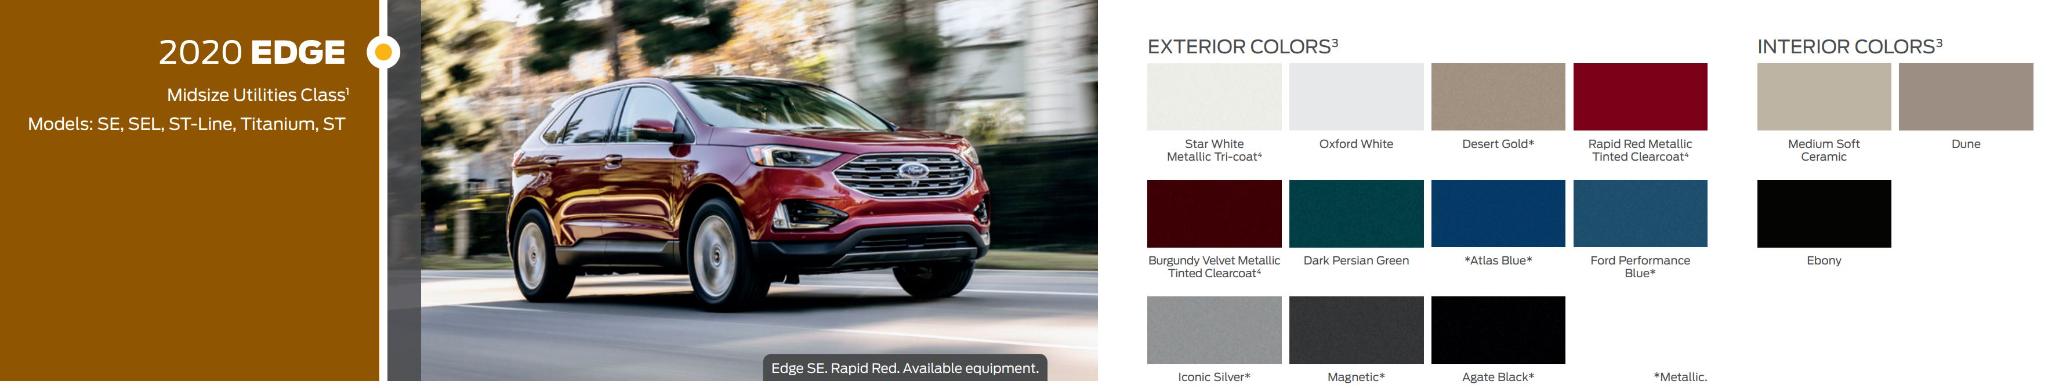 color options the Ford Edge came in